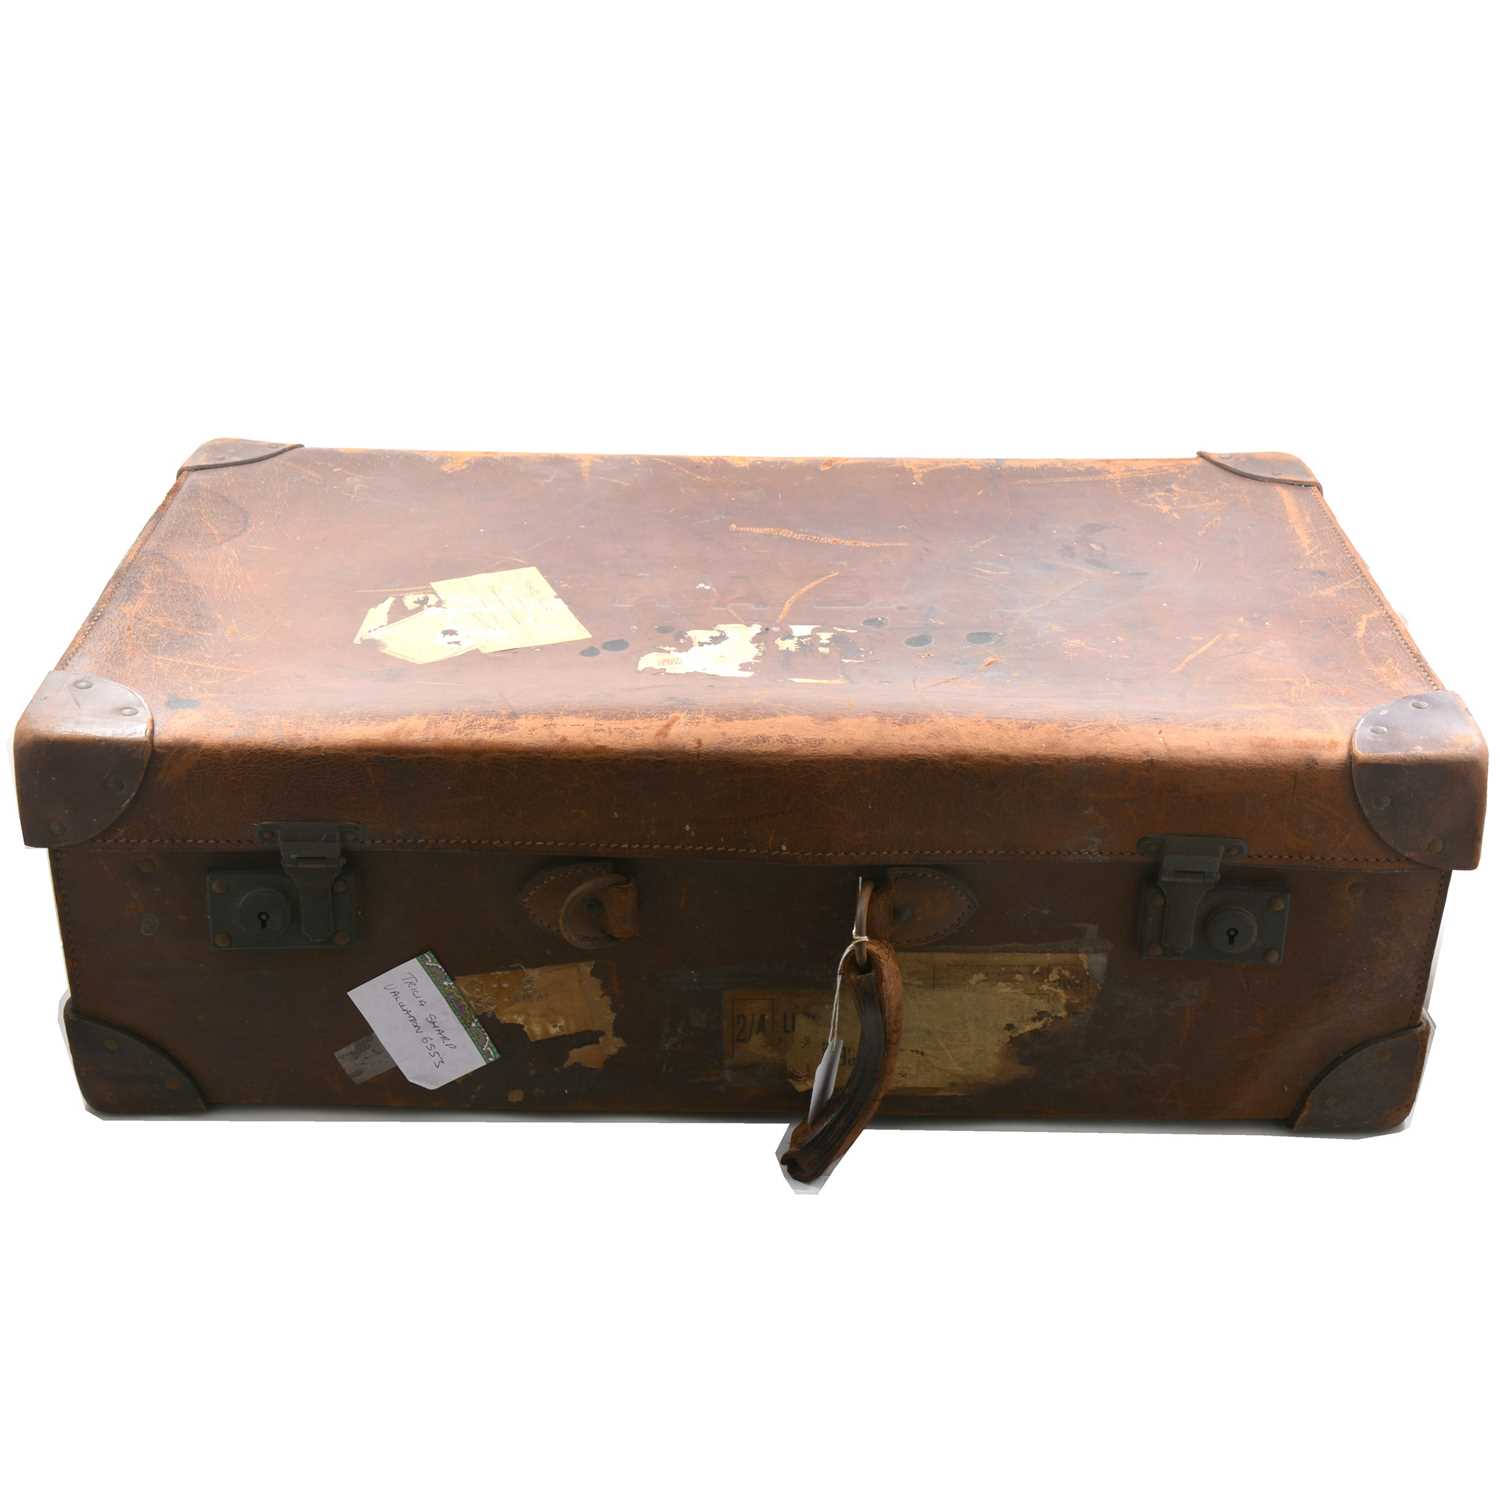 Lot 172 - A Vintage leather suitcase 75cm in length (broken handle), and a Marconiphone walnut cased mains radio.